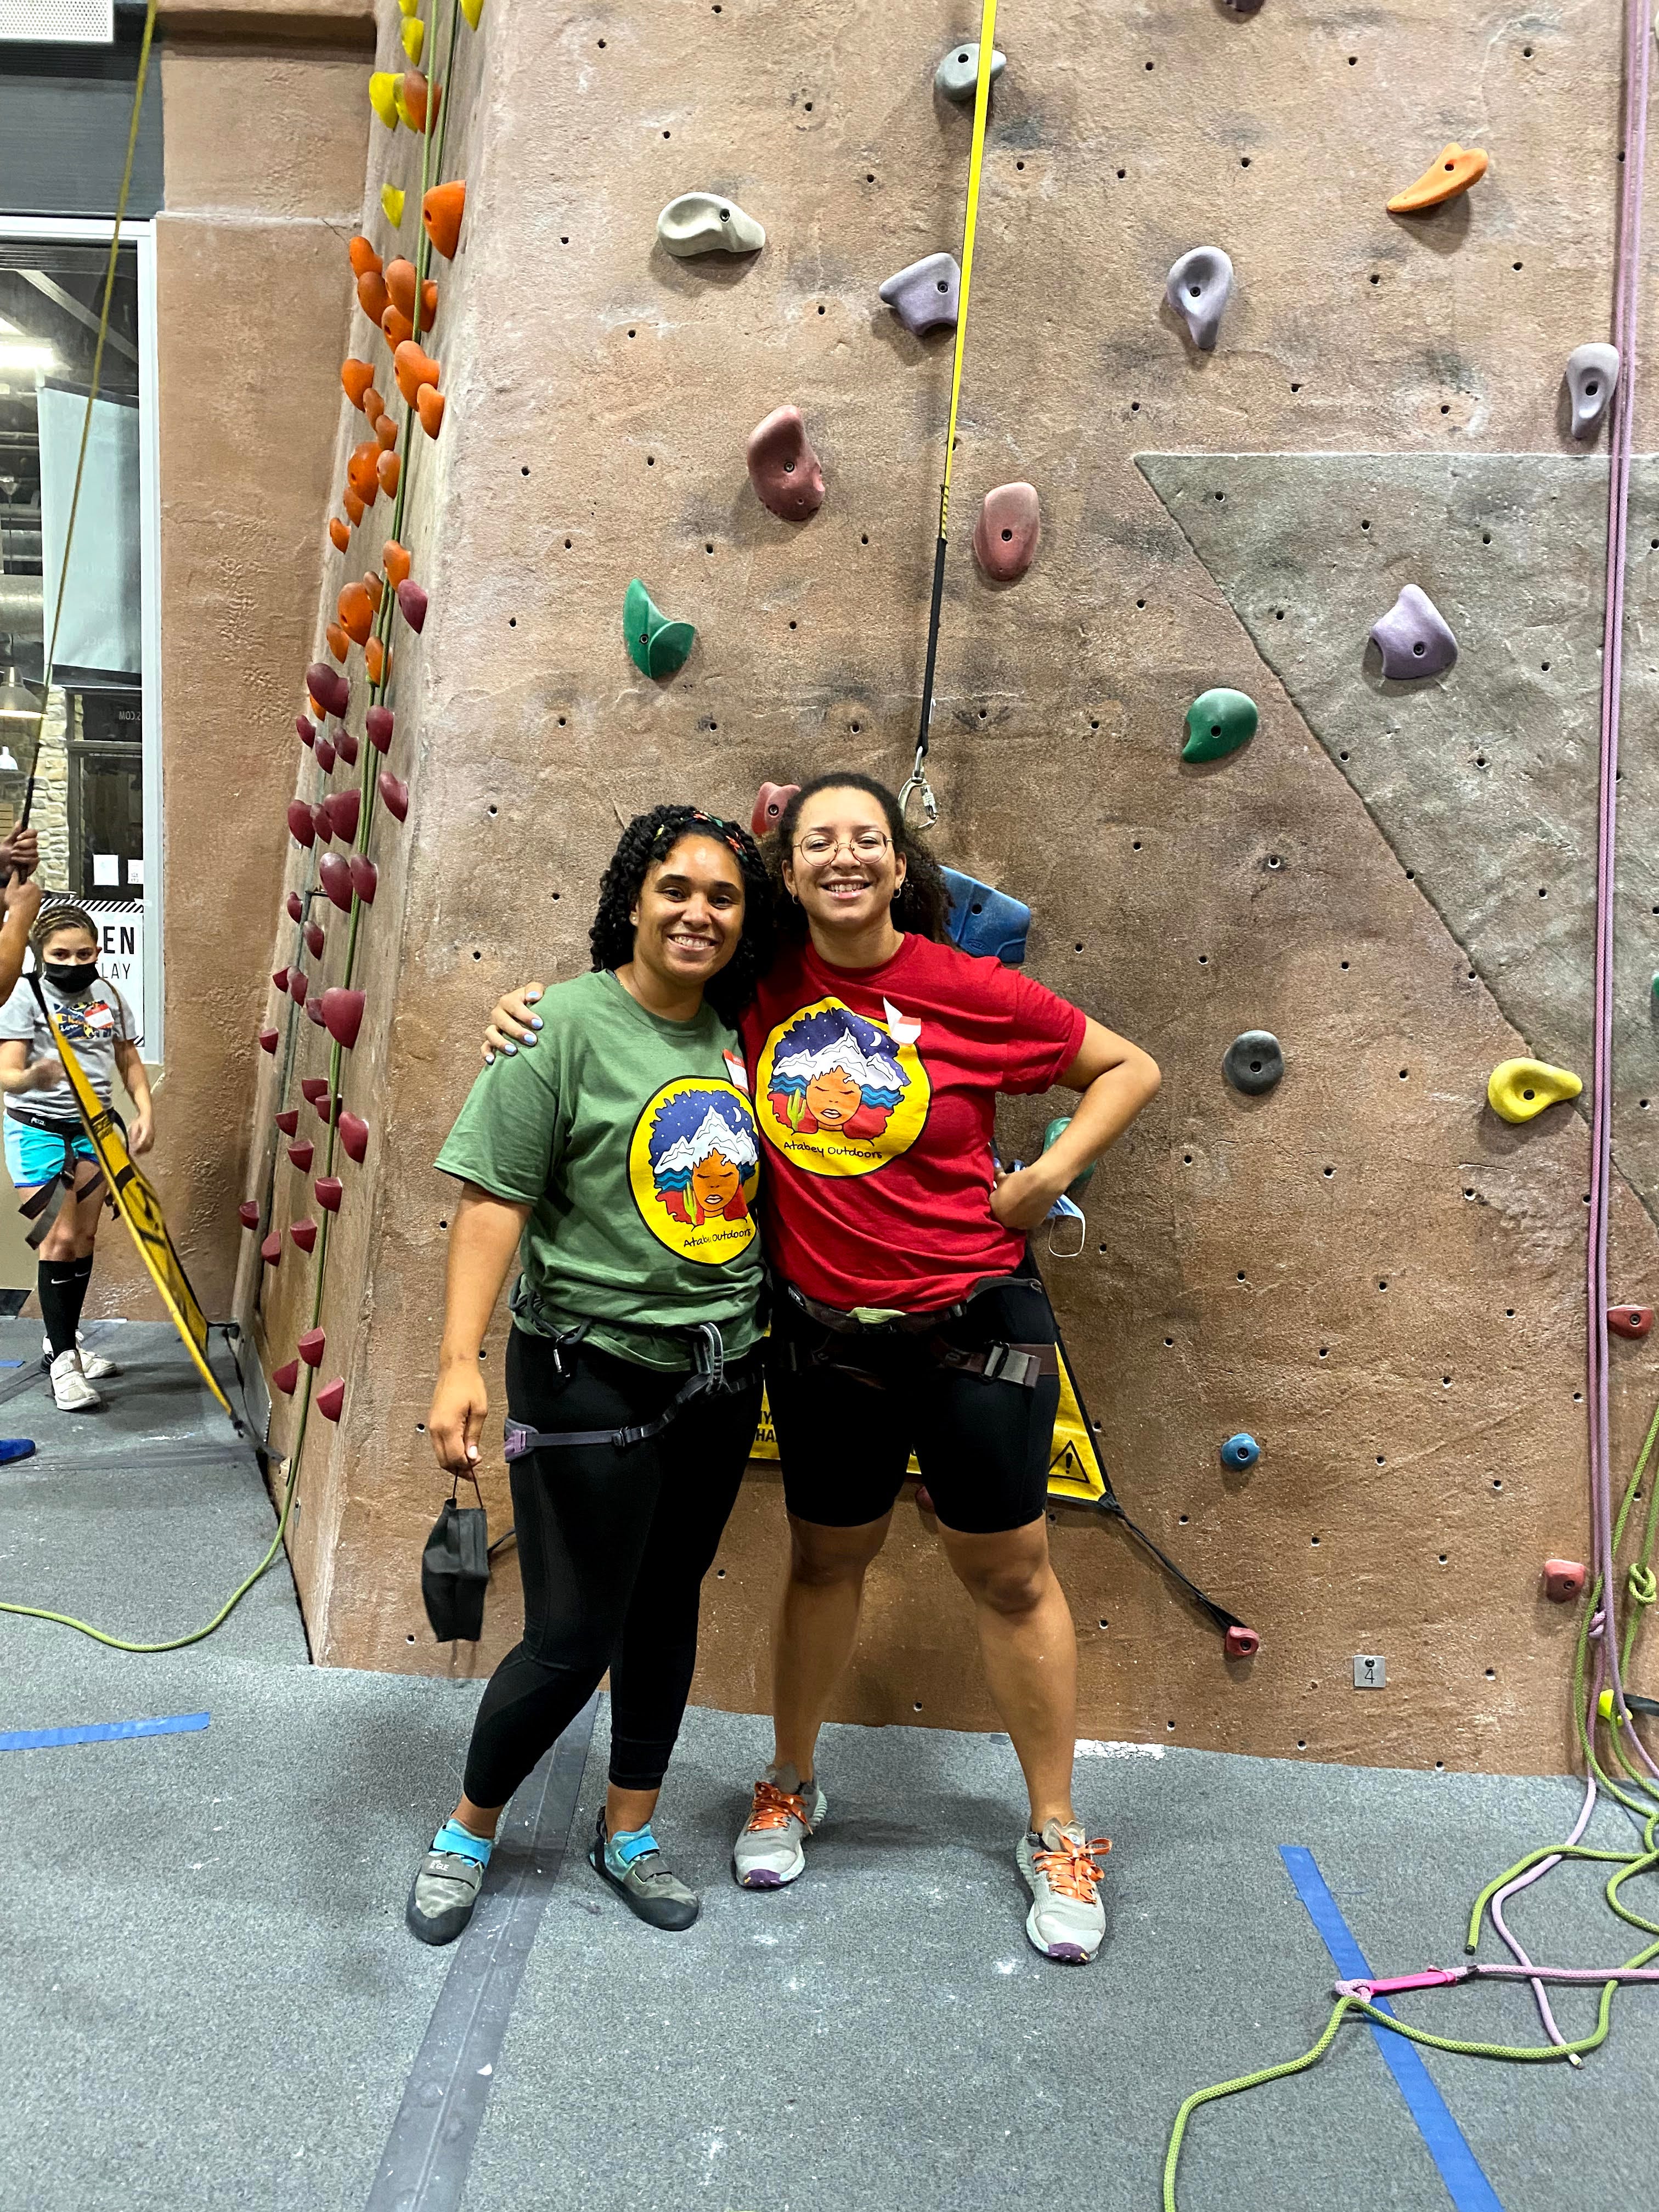 Atabey Outdoors Founder Raquel Gomez and volunteer Quin Works pose for a photo after indoor rock climbing.